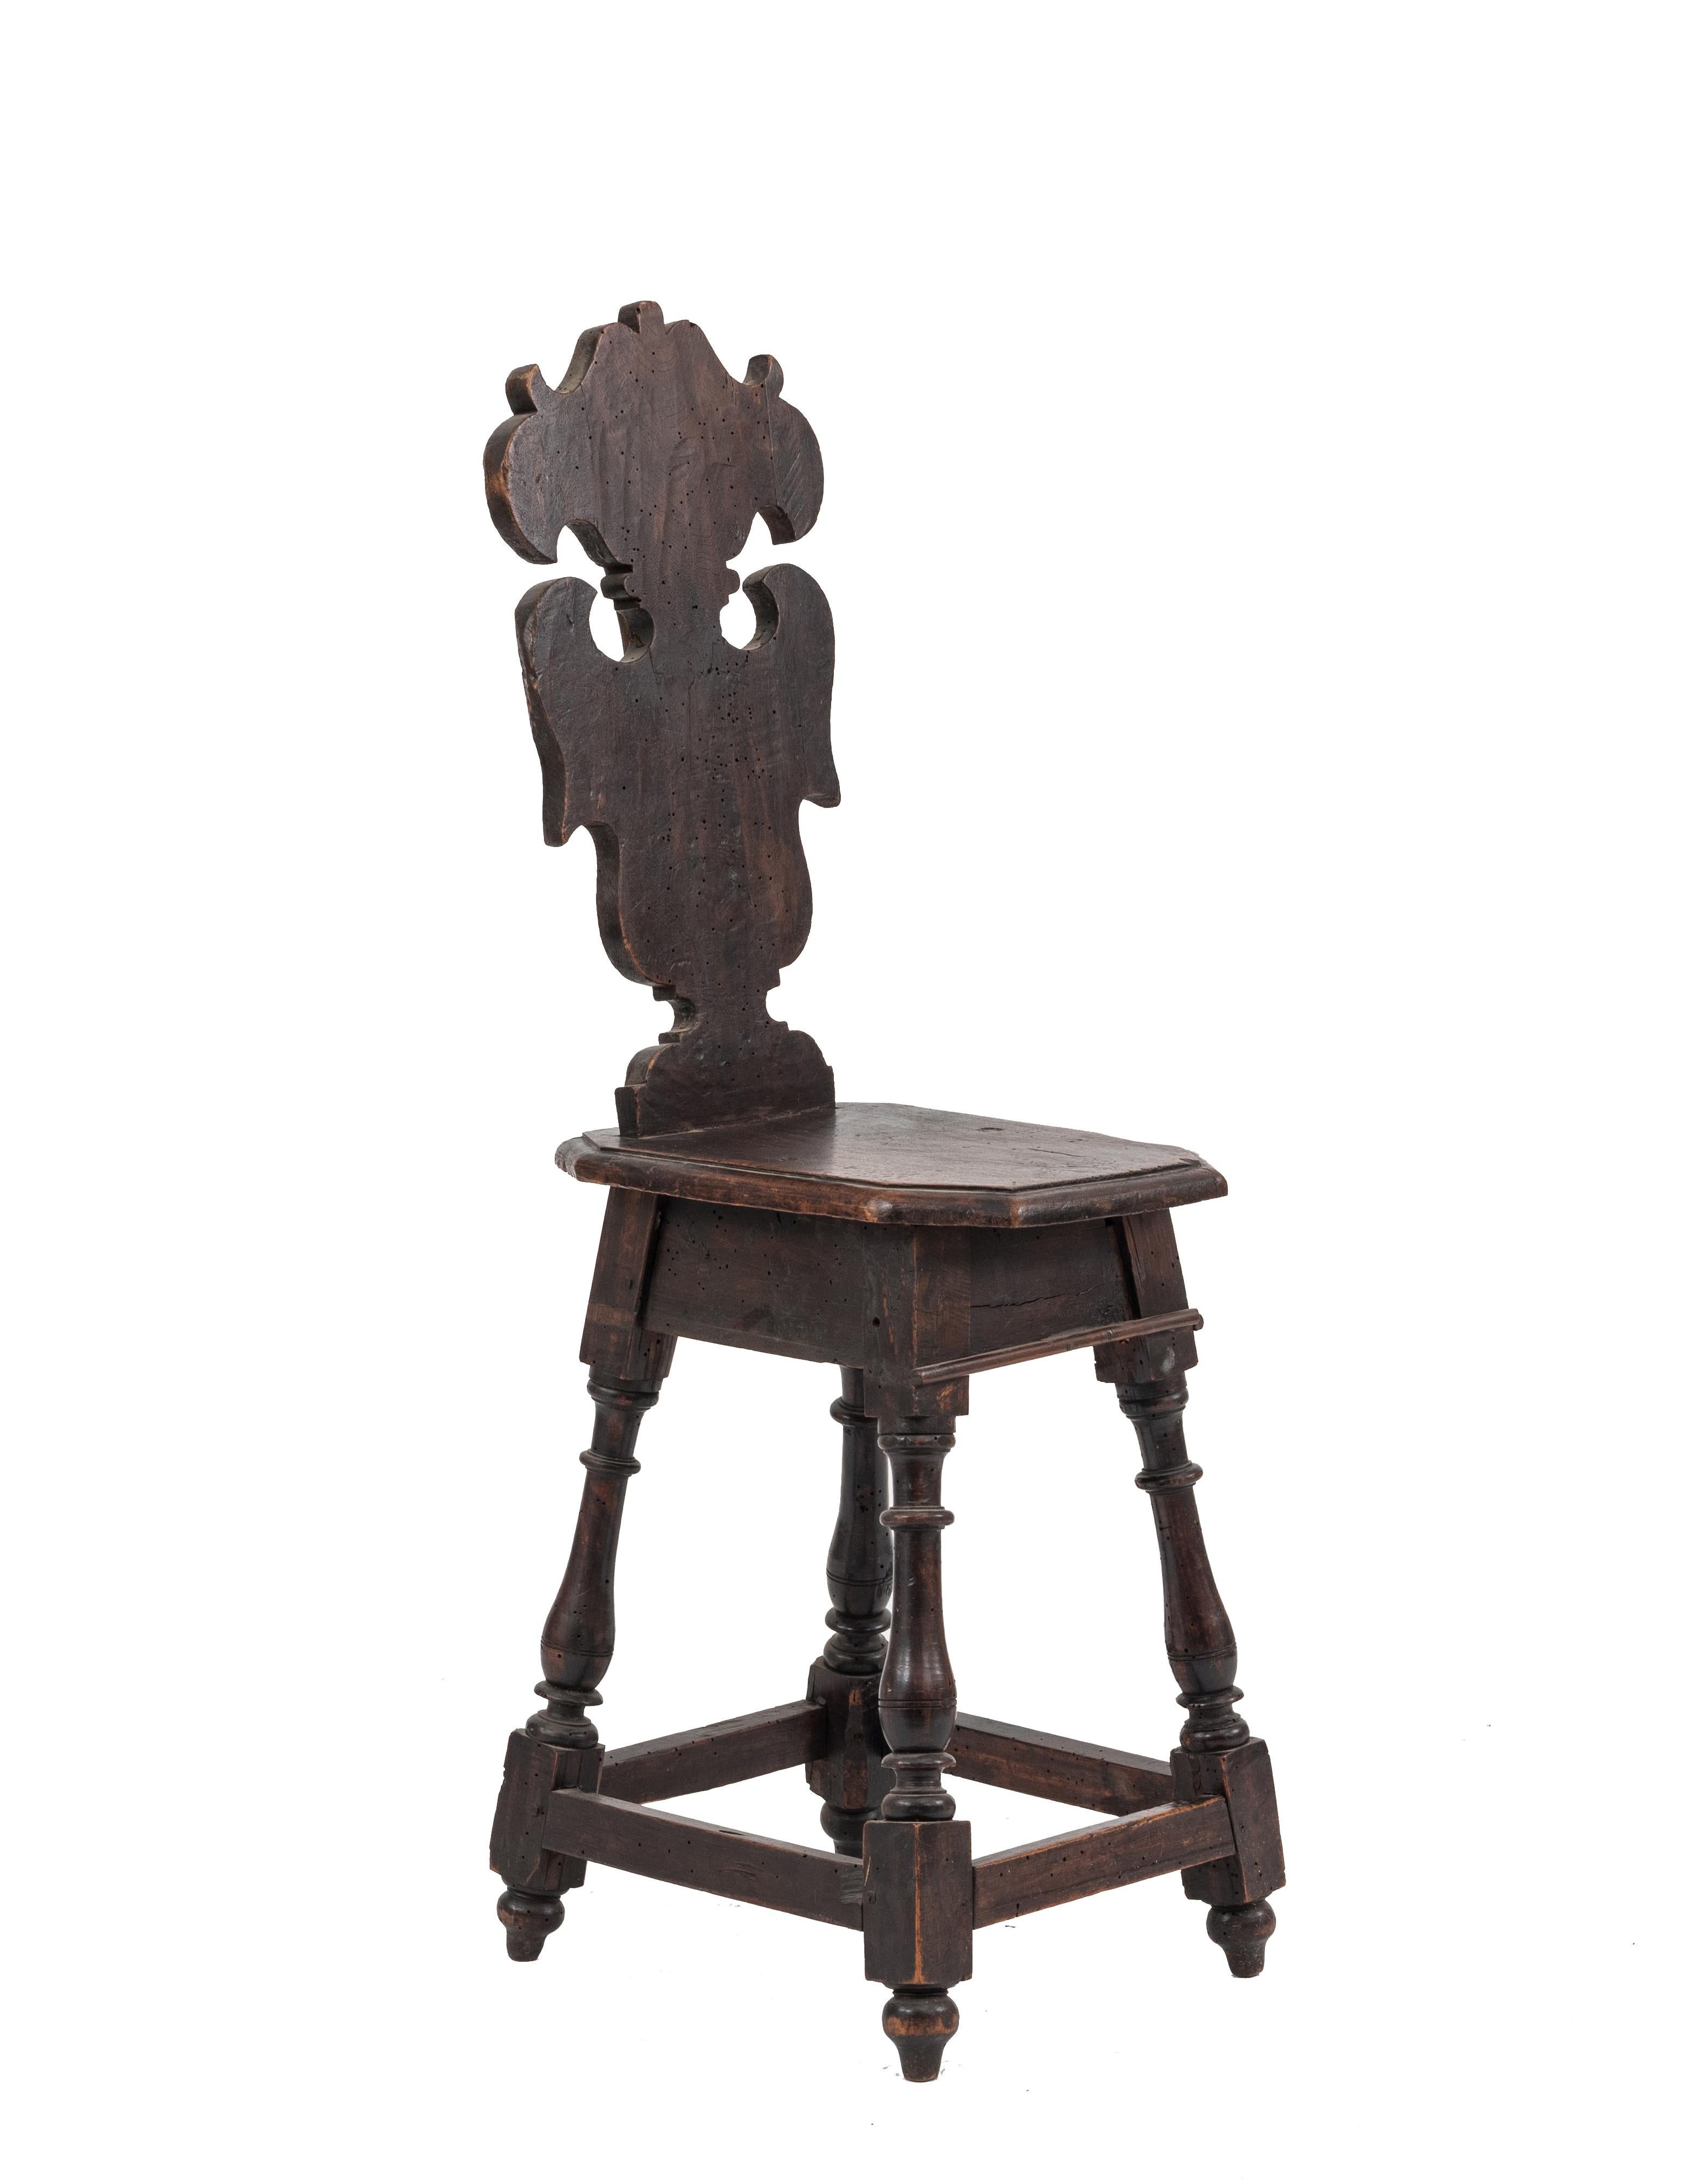 Pair of Italian Renaissance style (17th Cent) walnut Sgabelli with 4 turned legs and stretcher.
